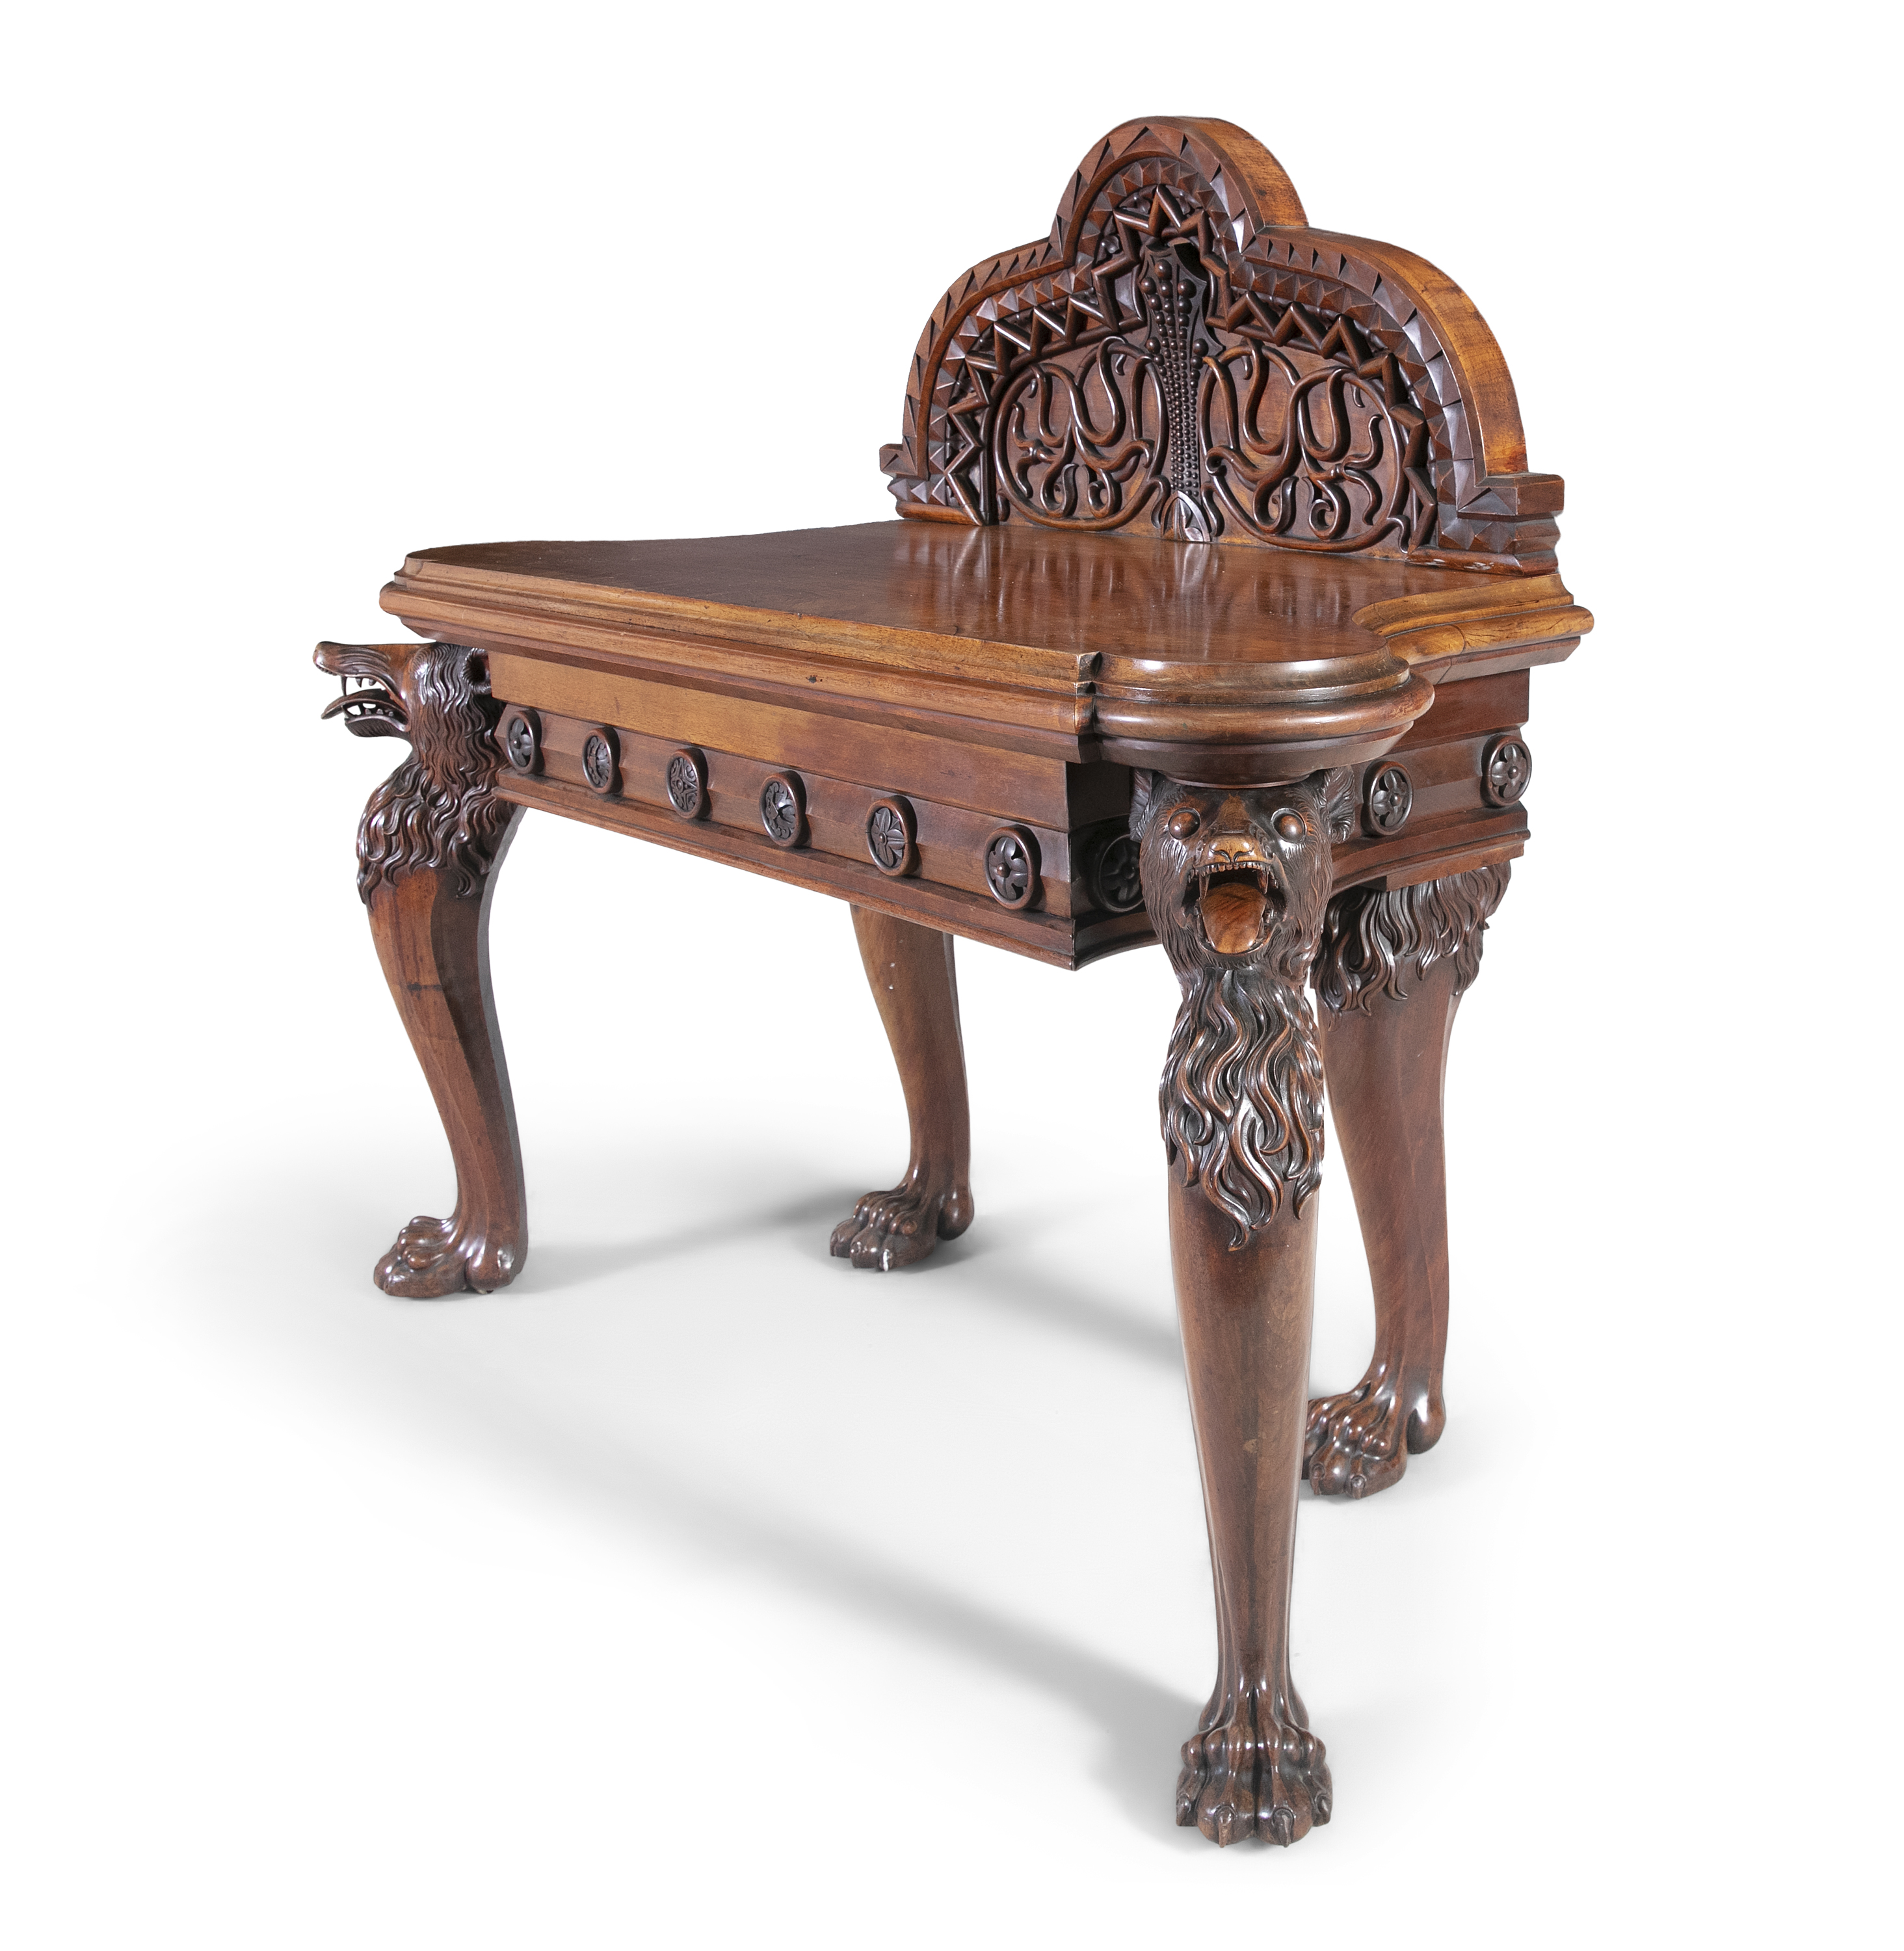 A 19TH CENTURY IRISH WALNUT SIDE TABLE, the arched backboard heavily carved with geometric bands and - Image 3 of 3